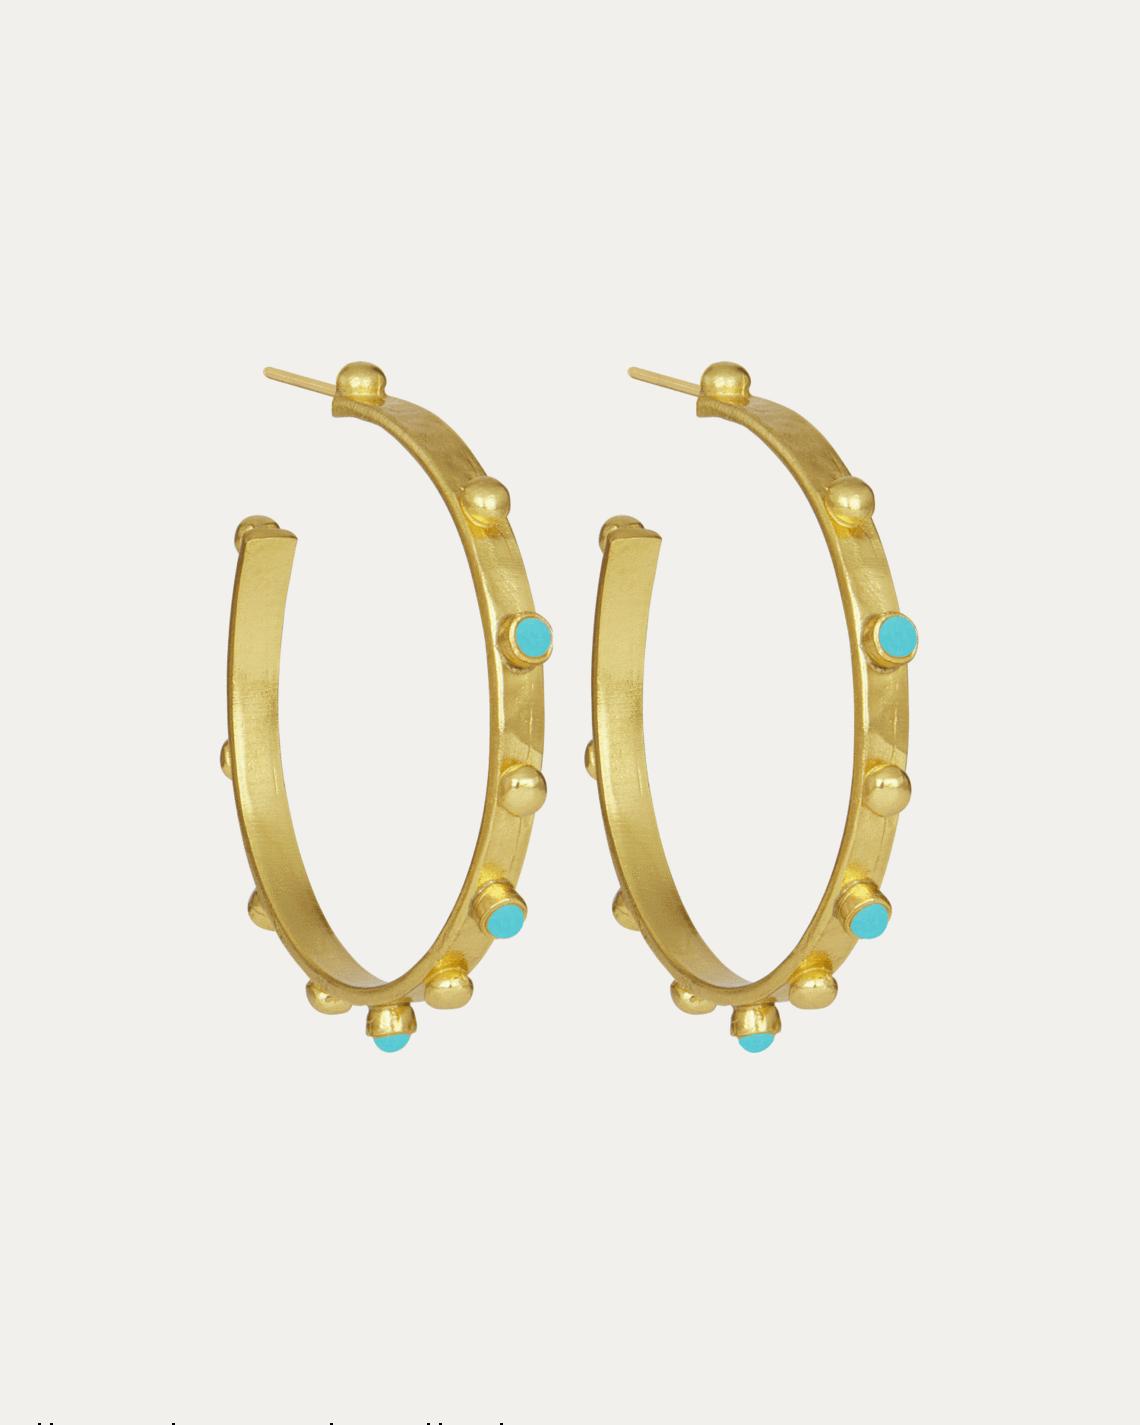 Ottoman Hands Tanrica Large Hoop Earrings with Turquoise Beads